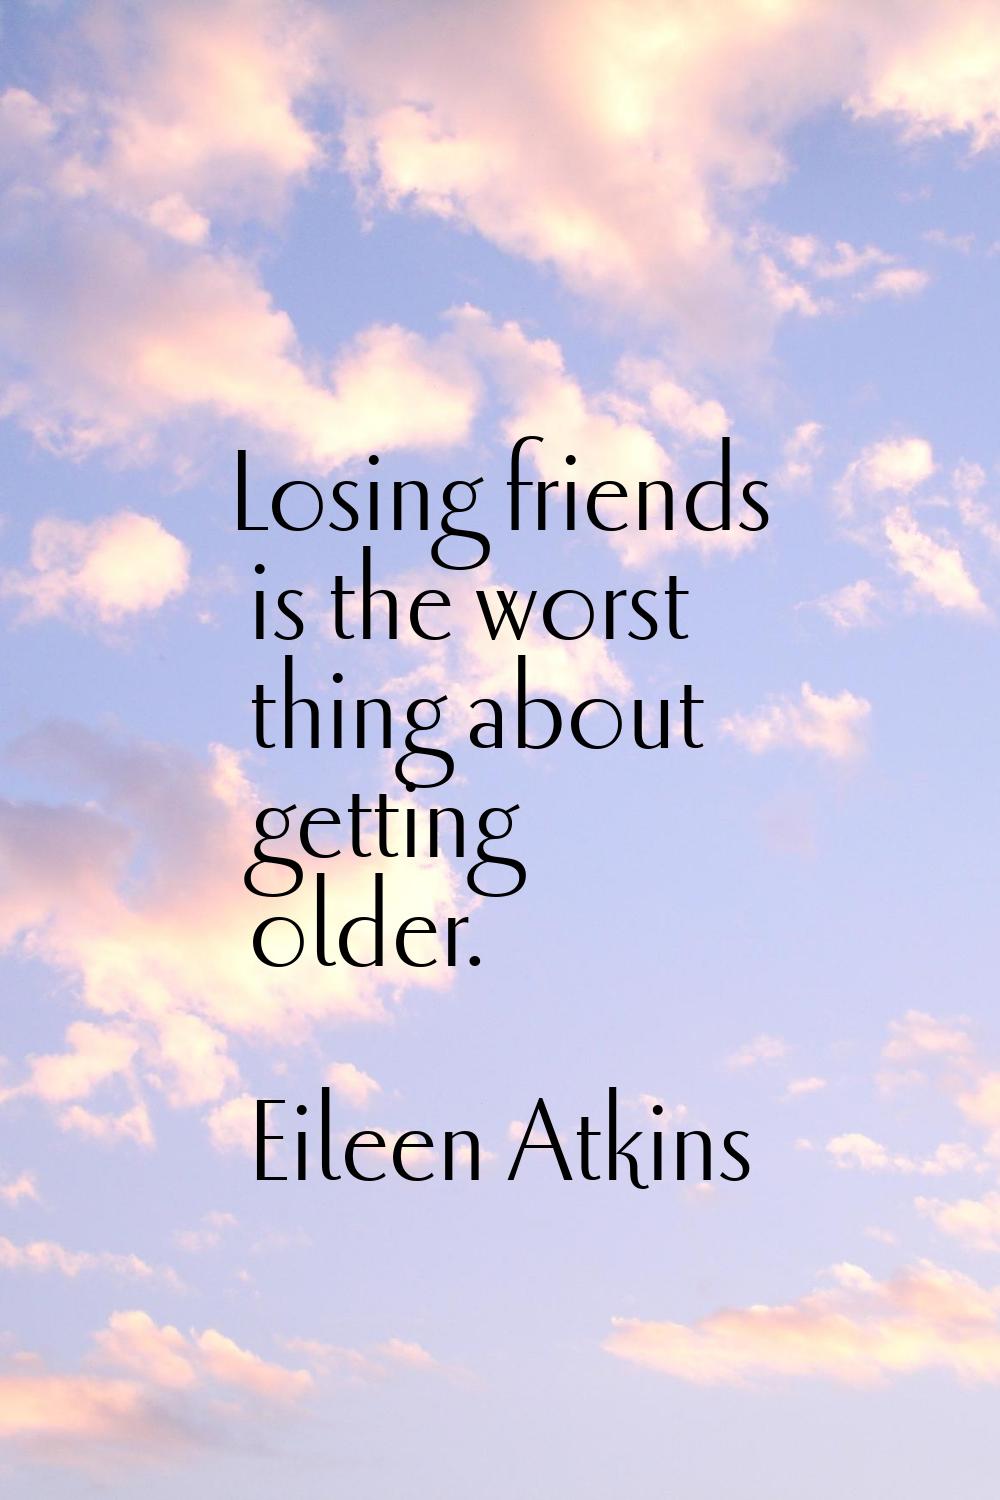 Losing friends is the worst thing about getting older.